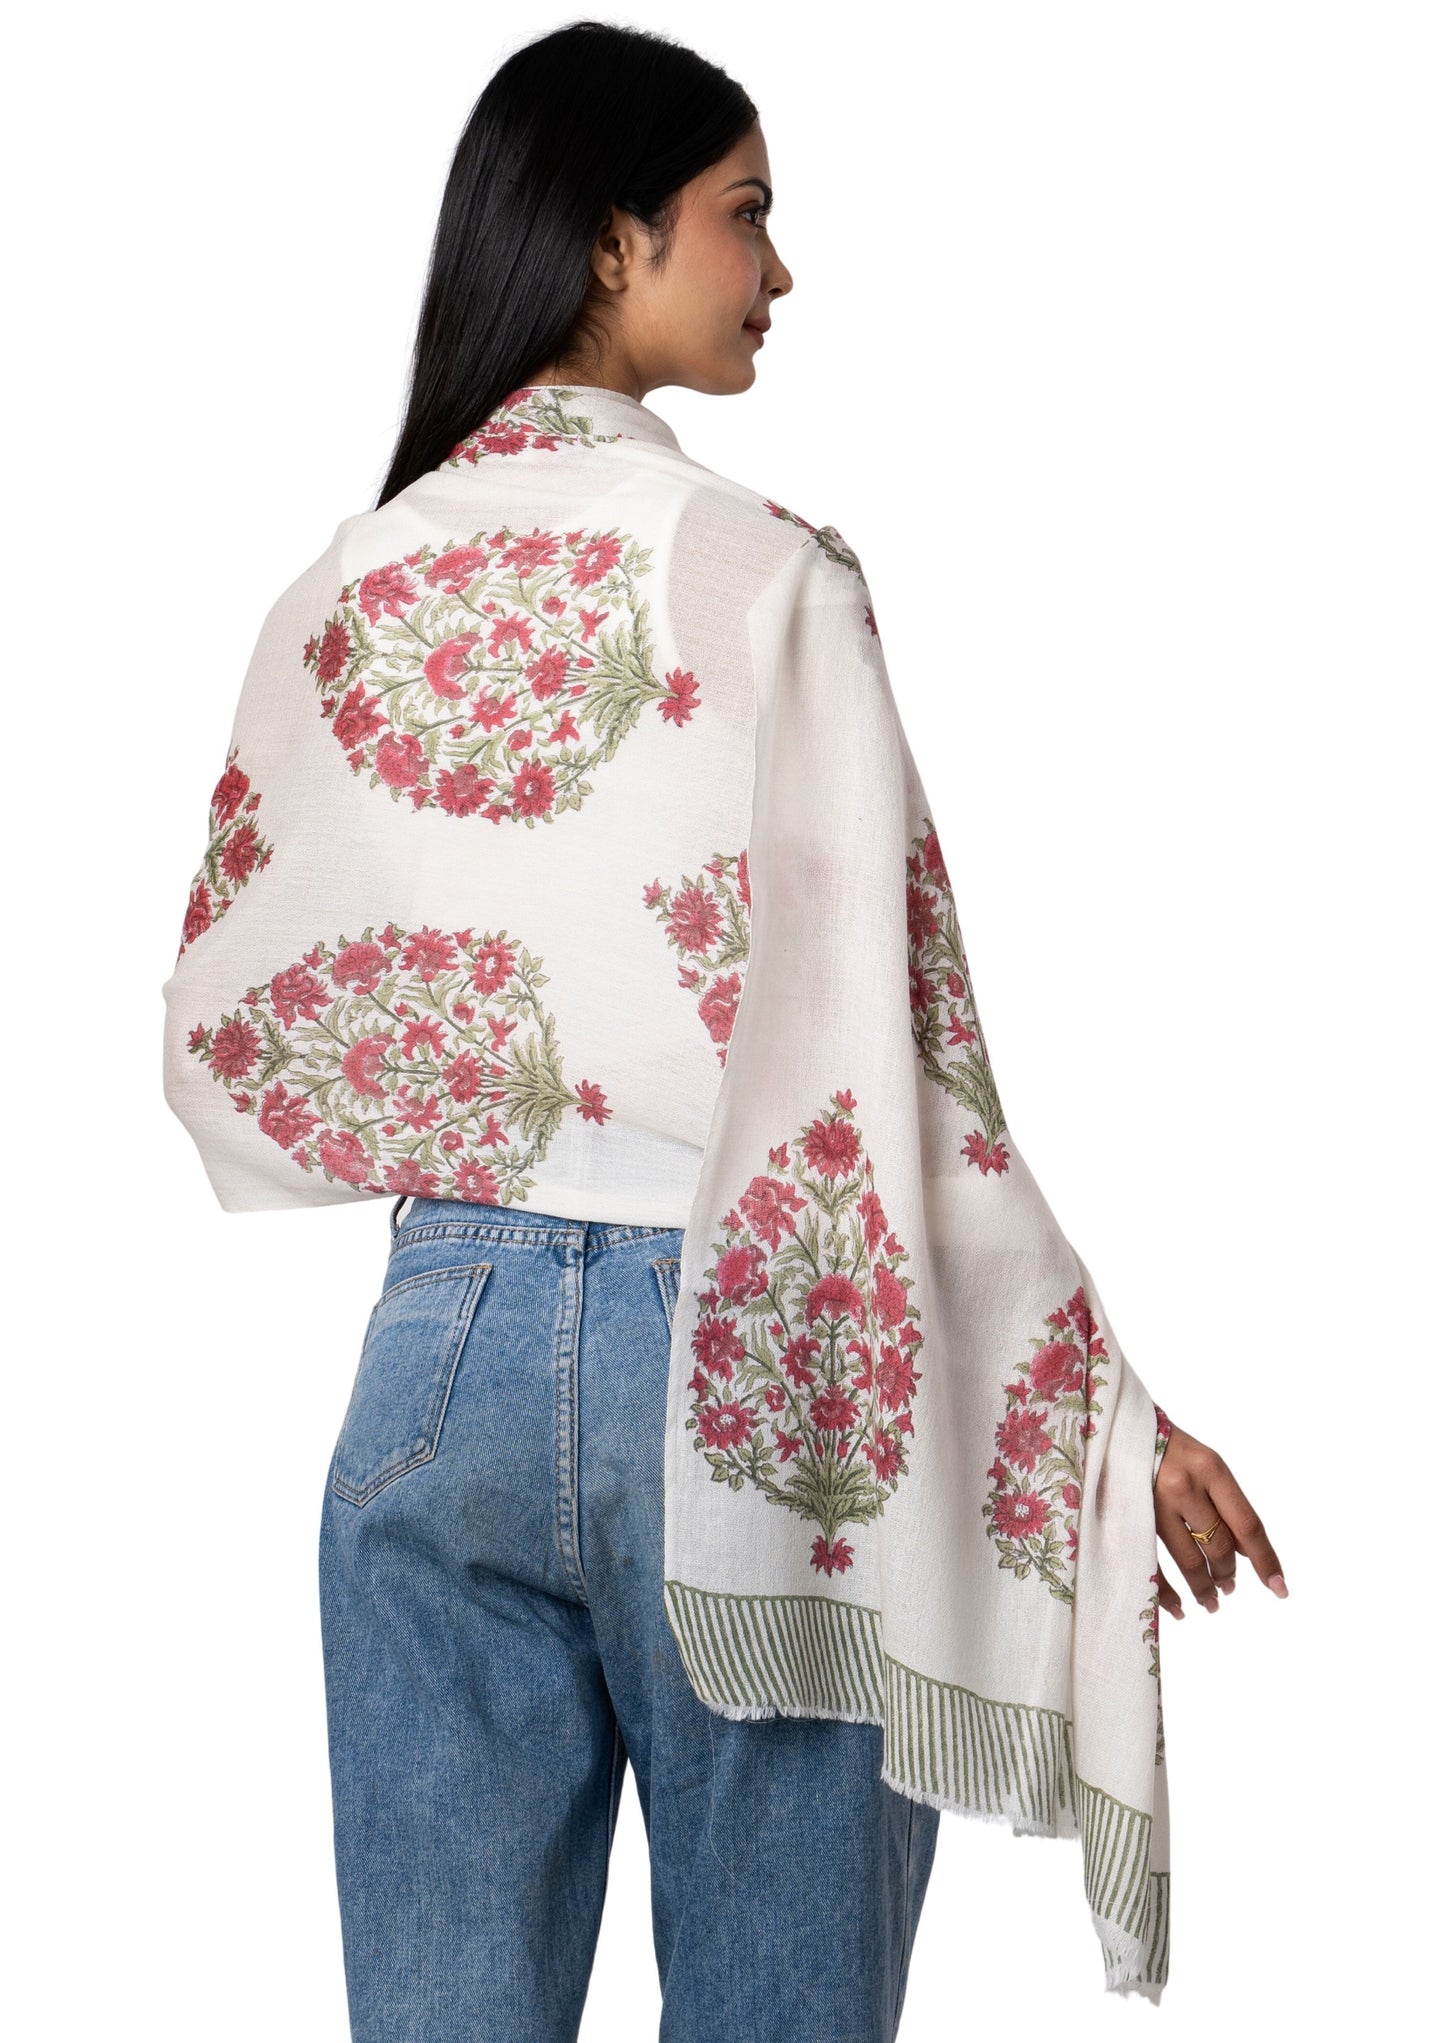 Elegant Wool Scarf Shawl with Floral design printed with Block Print technique